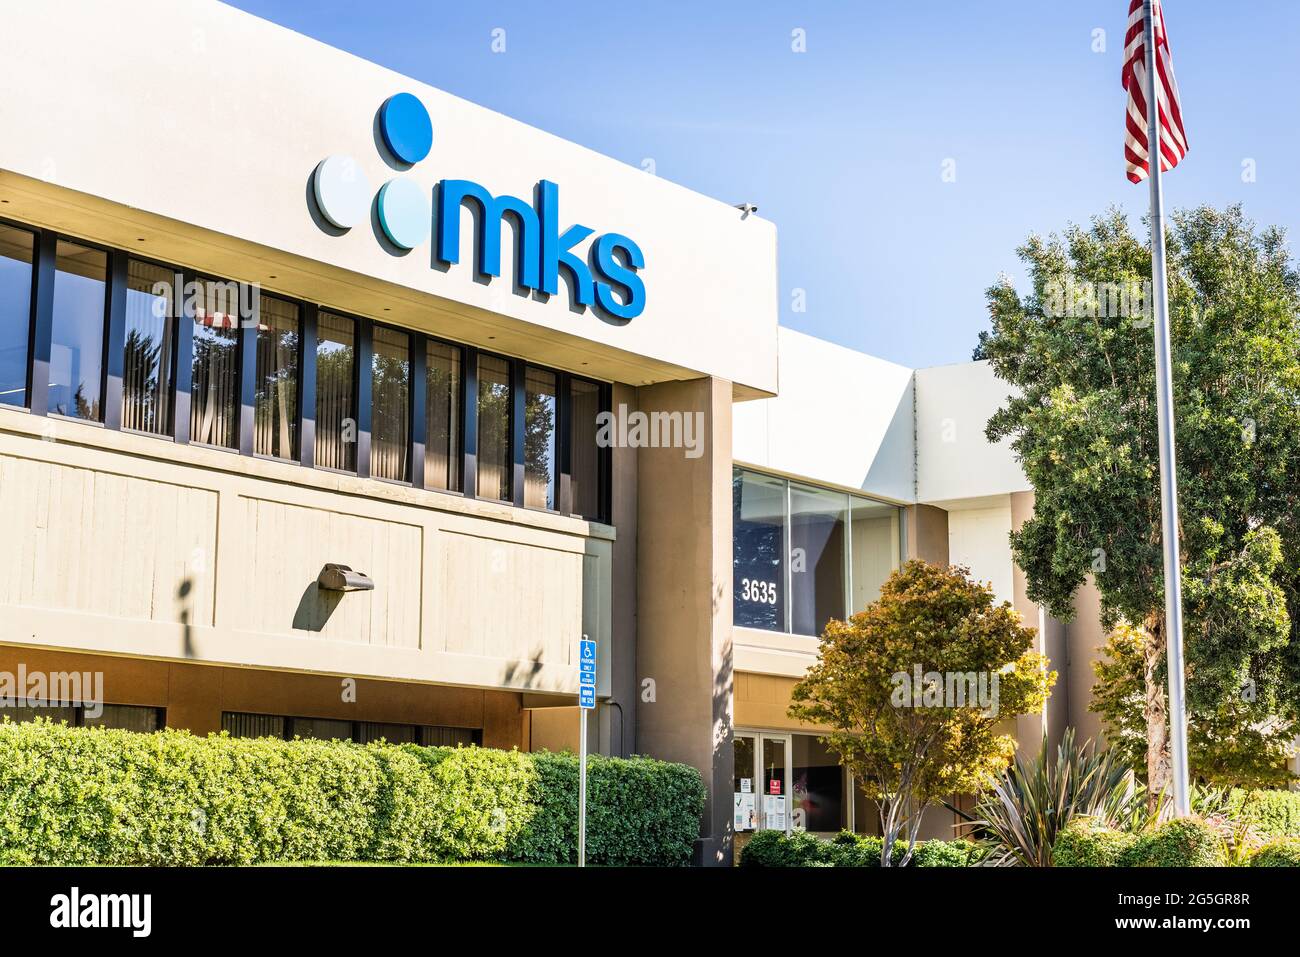 Sep 26, 2020 Santa Clara / CA / USA - MKS Instruments headquarters in Silicon Valley; MKS Instruments is an American process control instrumentation c Stock Photo